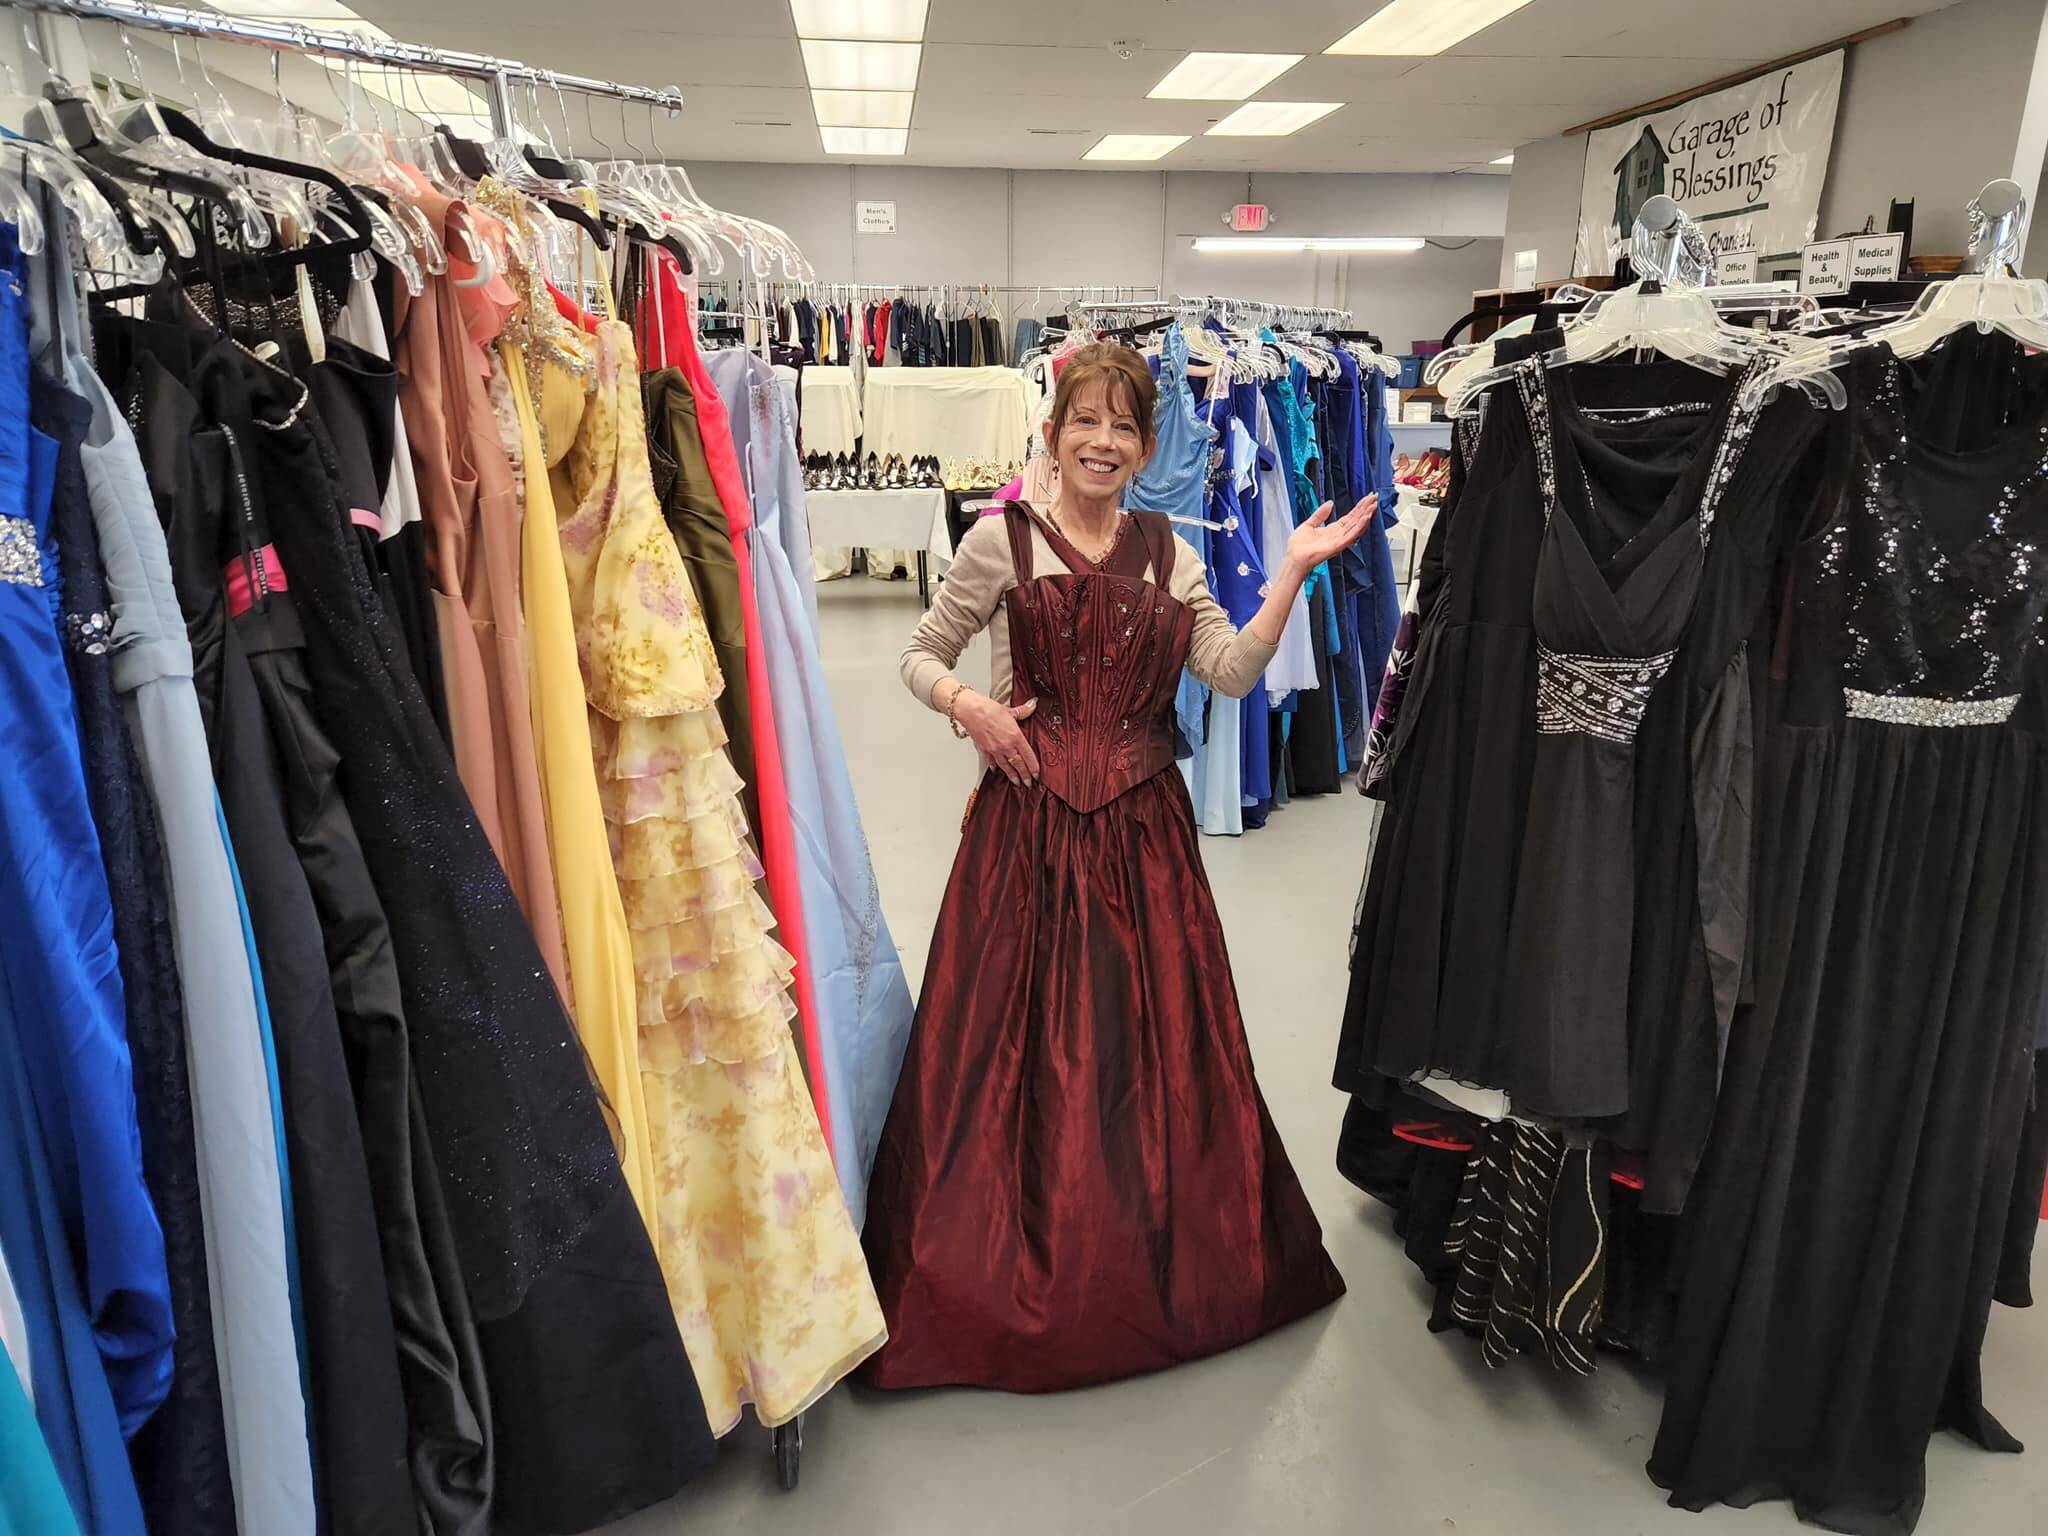 Patty Folkestad with prom dresses. (Garage of Blessings Facebook)